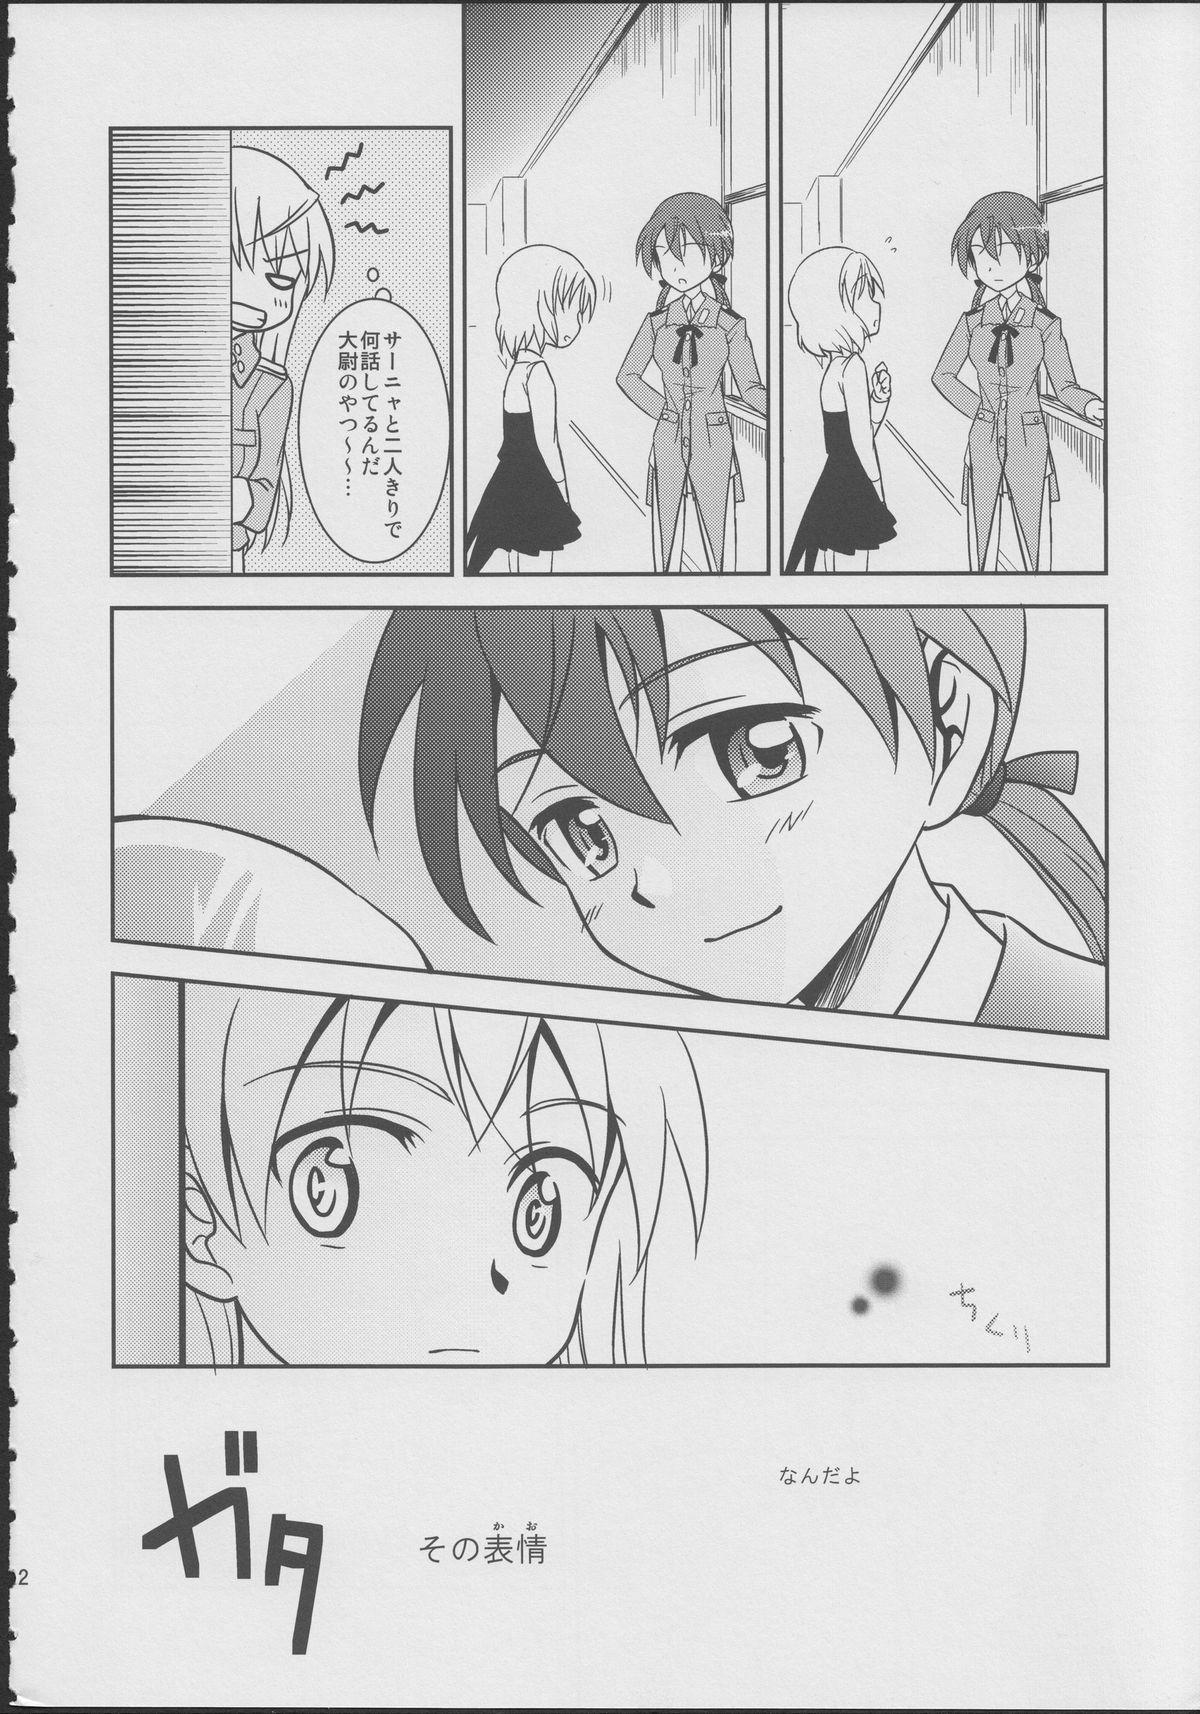 Small Tits Zygos! - Strike witches Muscle - Page 11